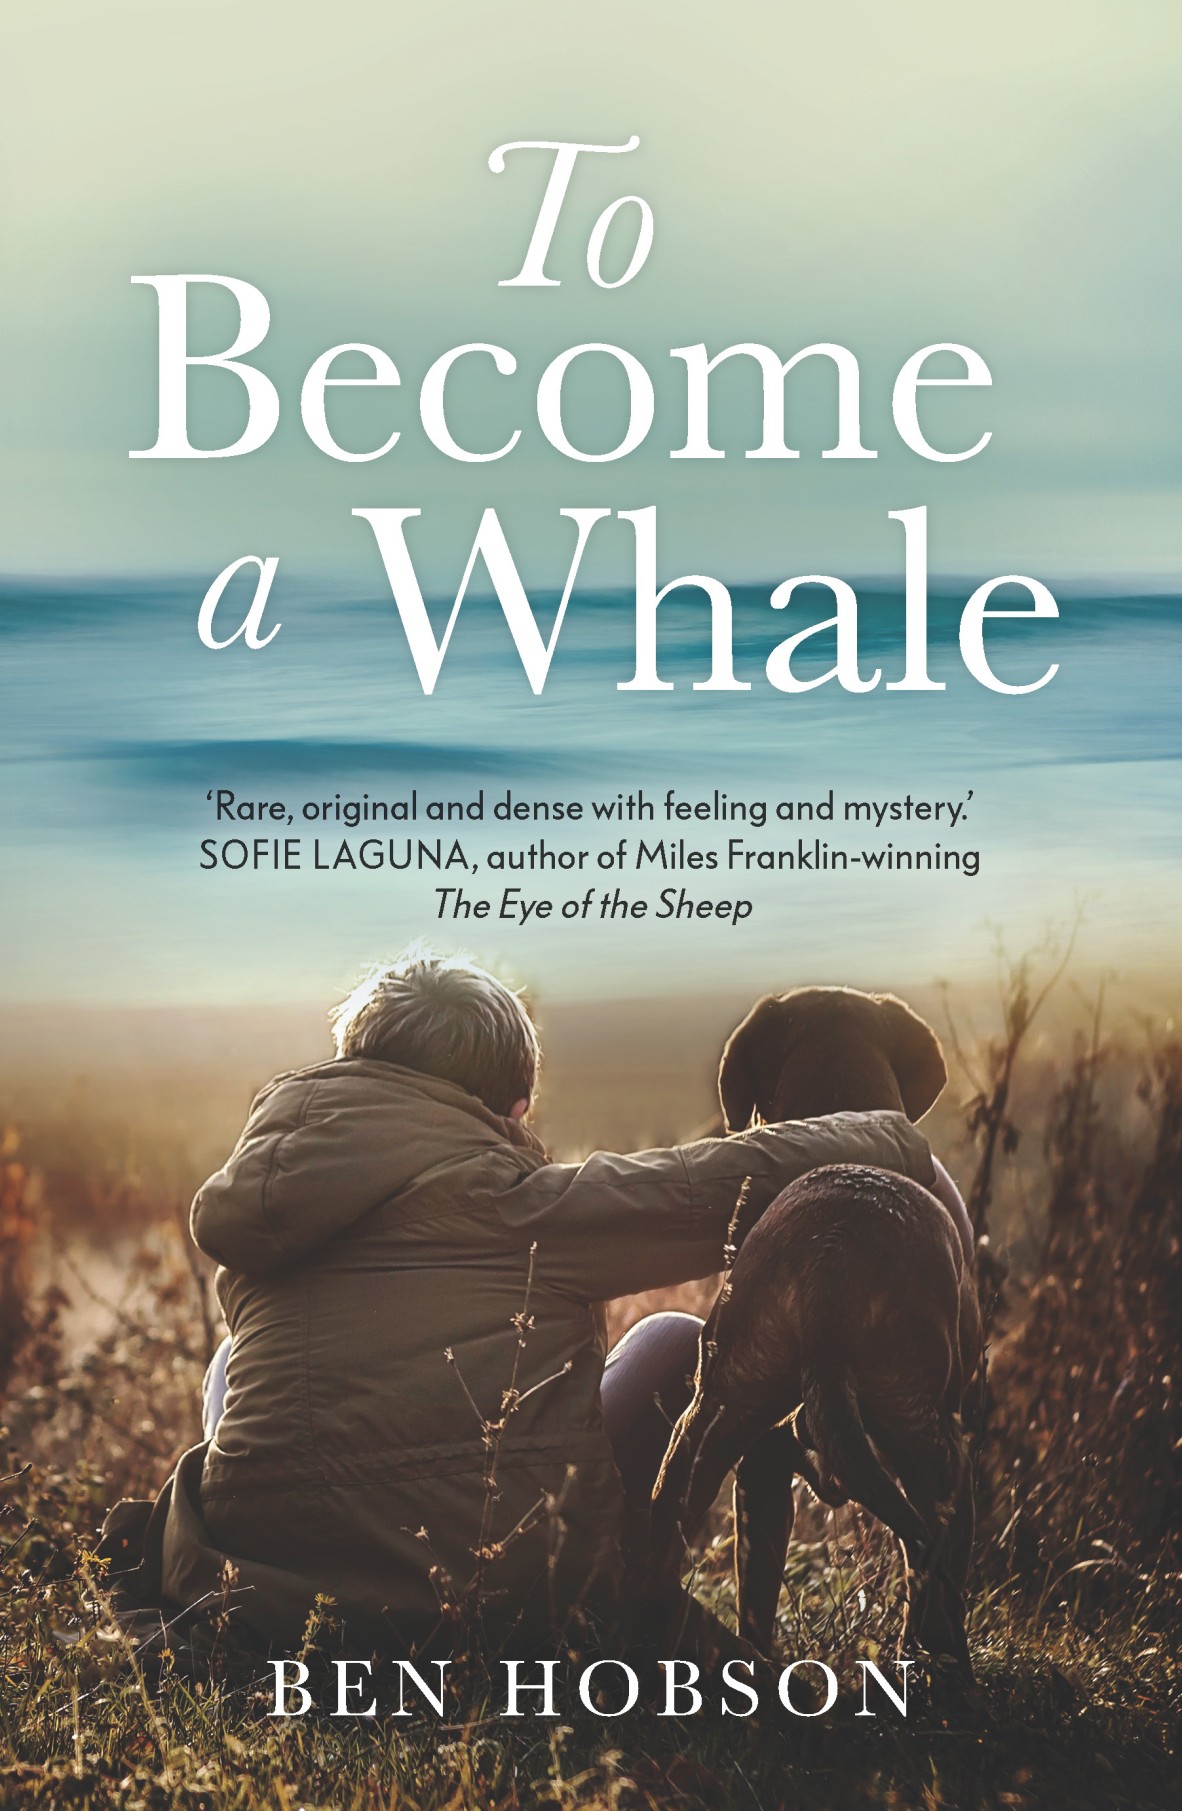 To Become a Whale by Ben Hobson